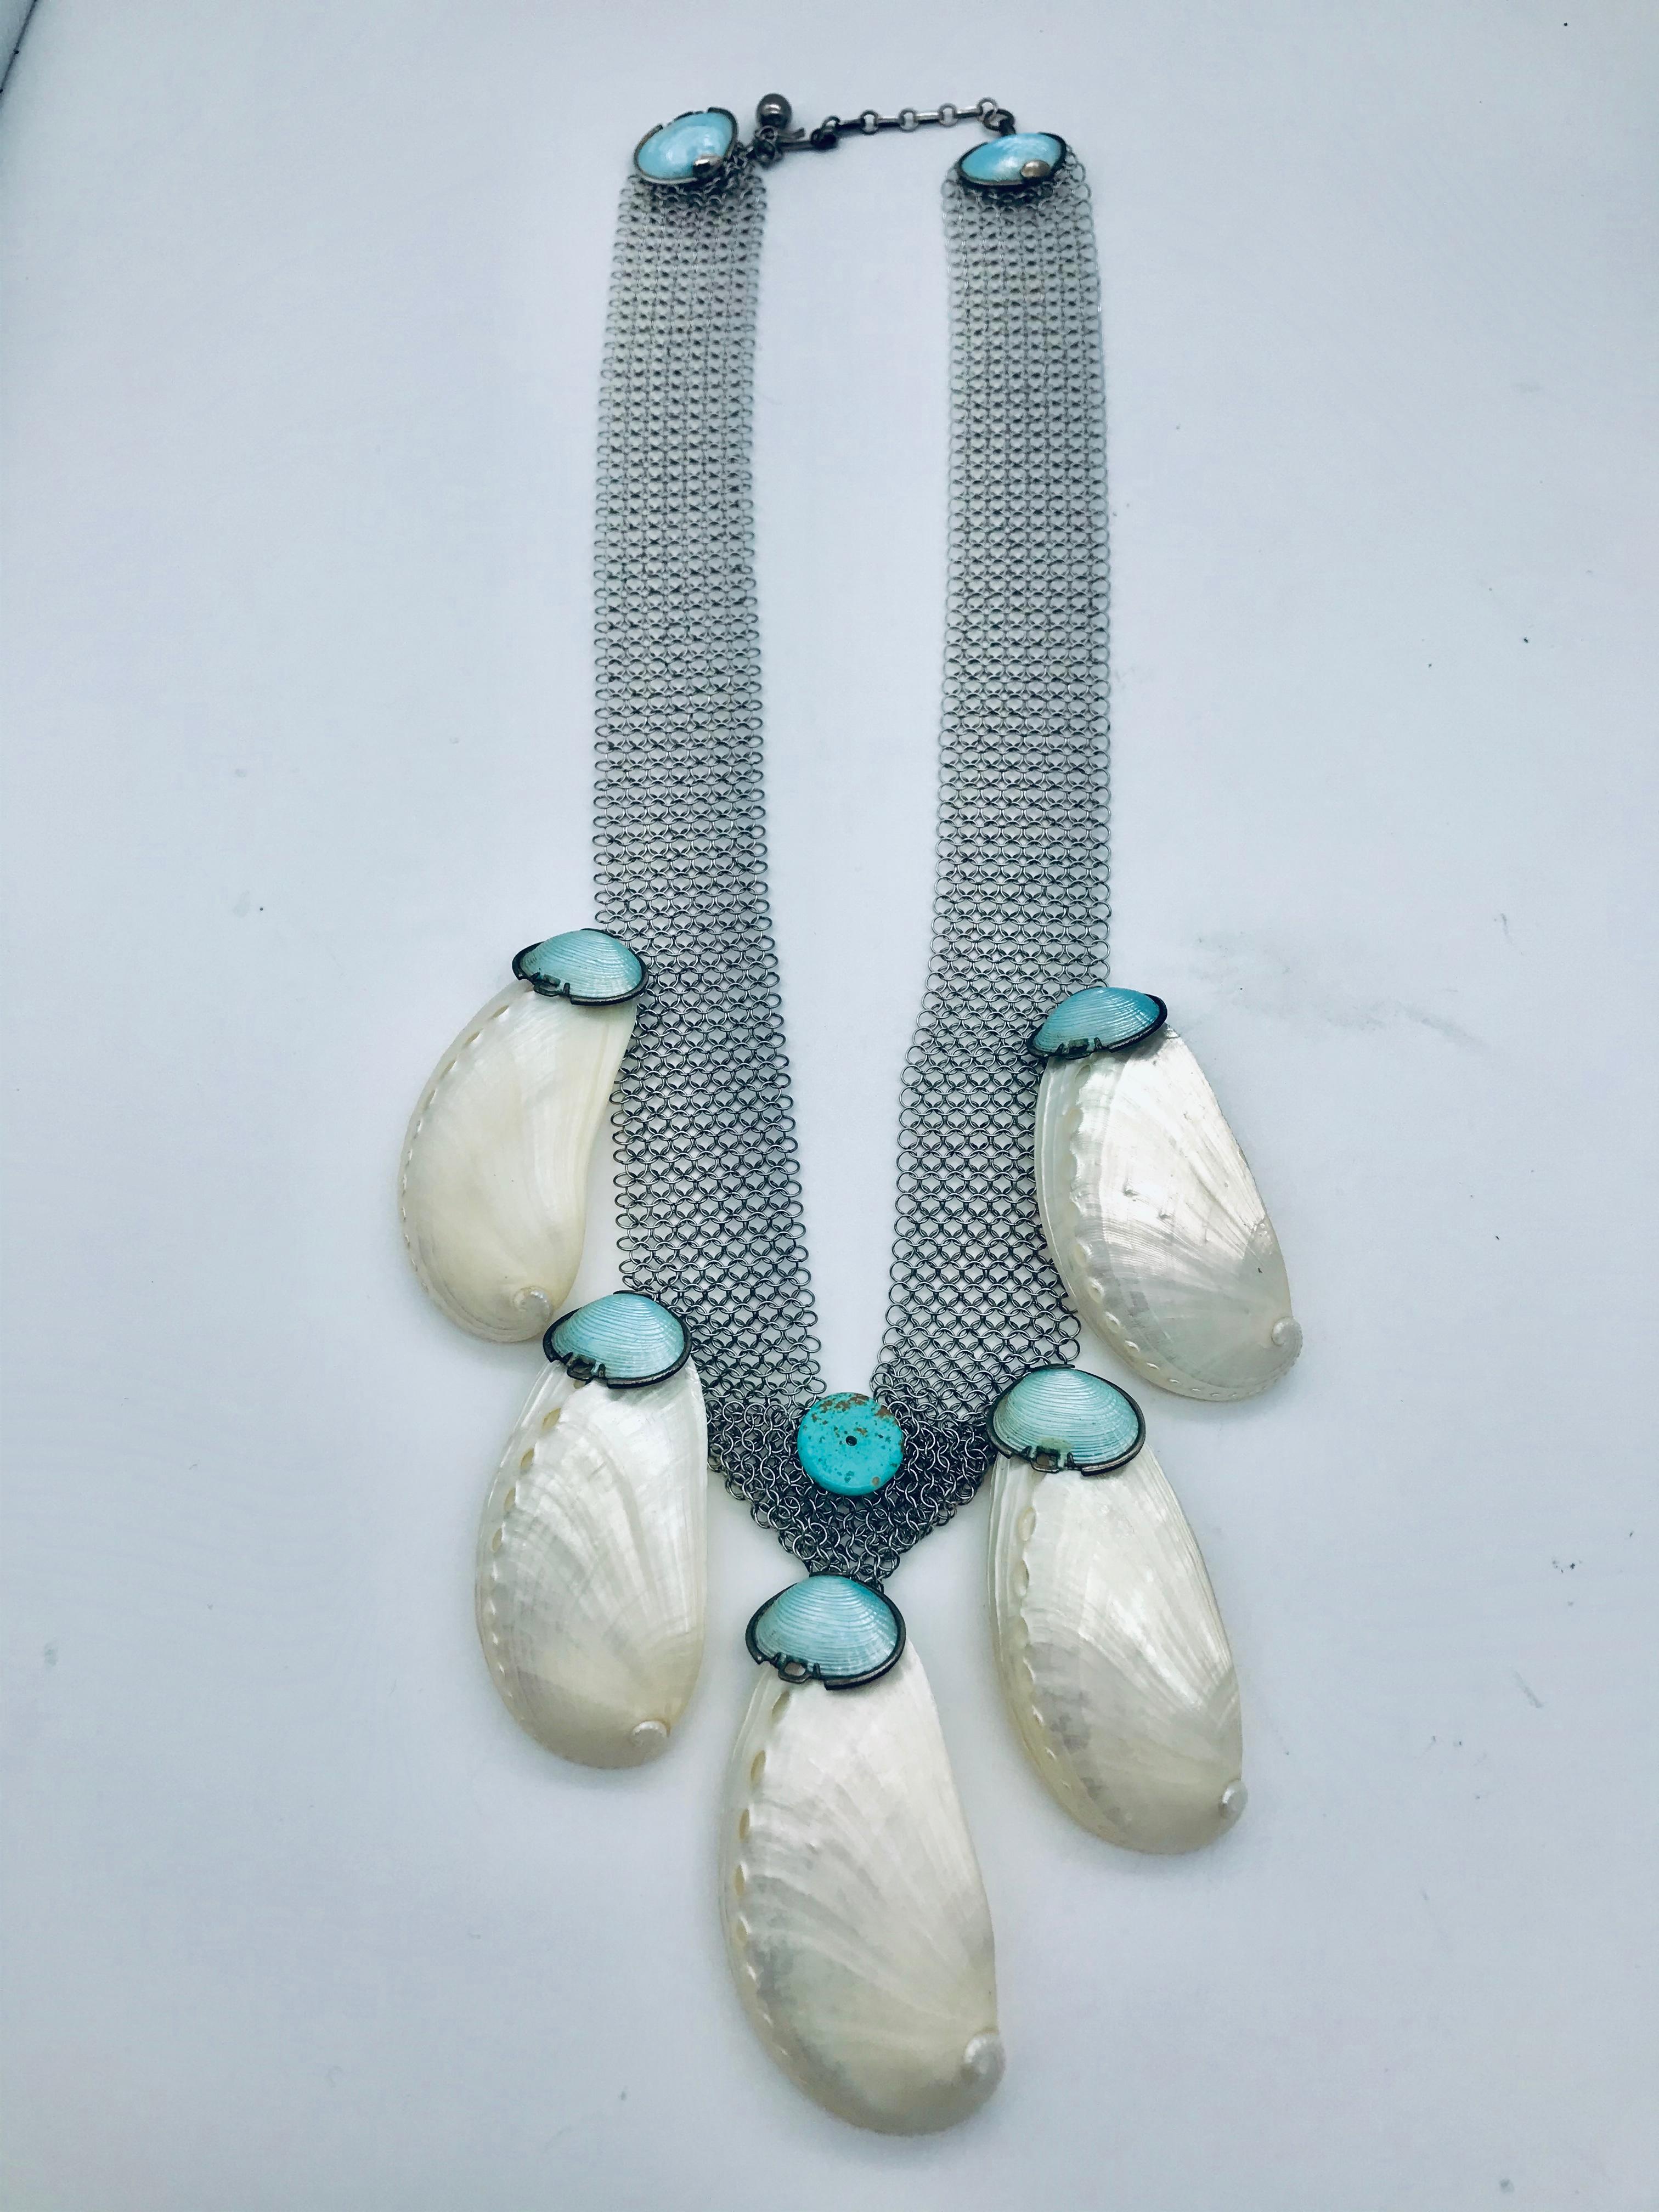 The Art -Deco Shell  necklace up-cycled with Stainless steel Mesh. Each white  shell is reinforced by use of architectural adhesive fusing  two shells together to create one object . Each natural shell is finished by Blue Enameled Deco Shell. These